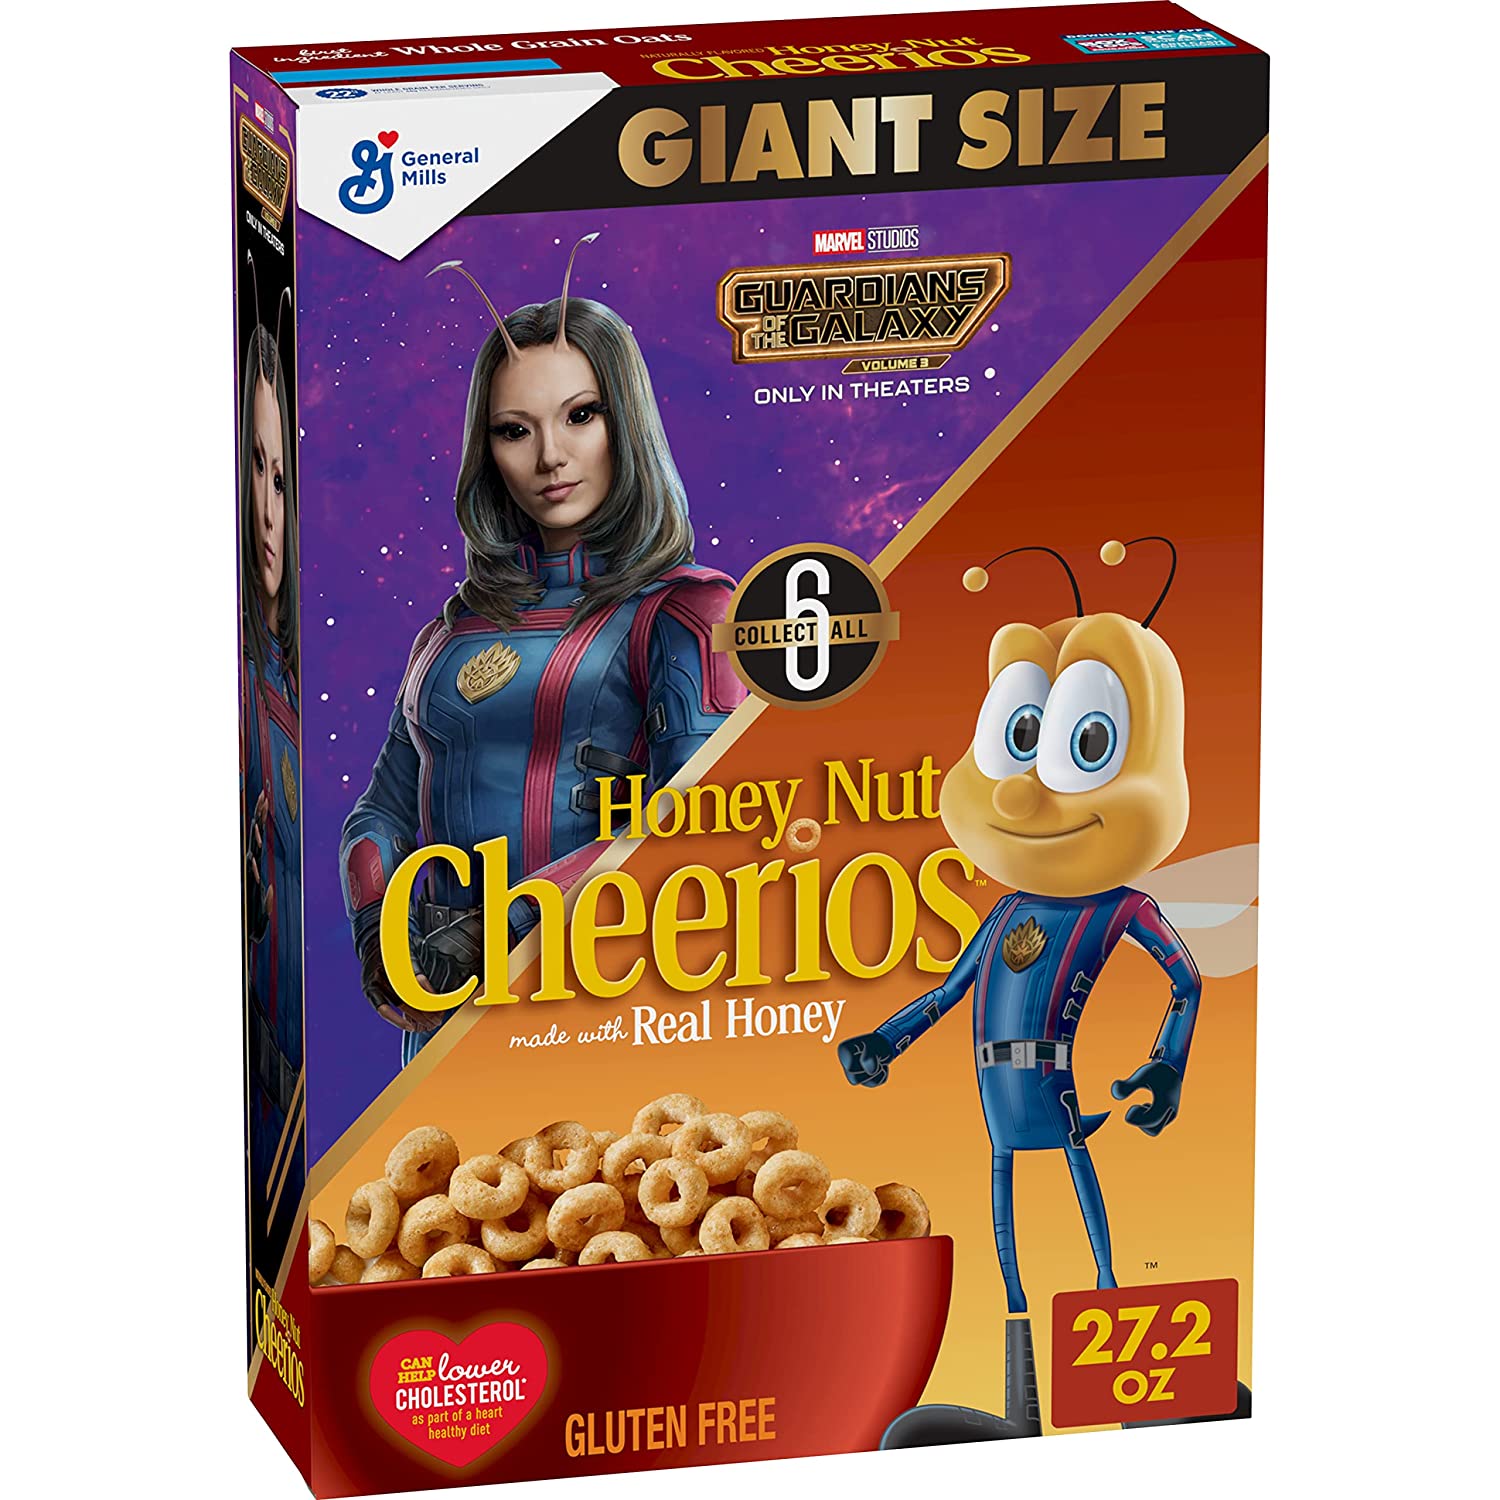 Honey Nut Cheerios Heart Healthy Cereal, Giant Size, 27.2 OZ, $3.90 after 15% s&s